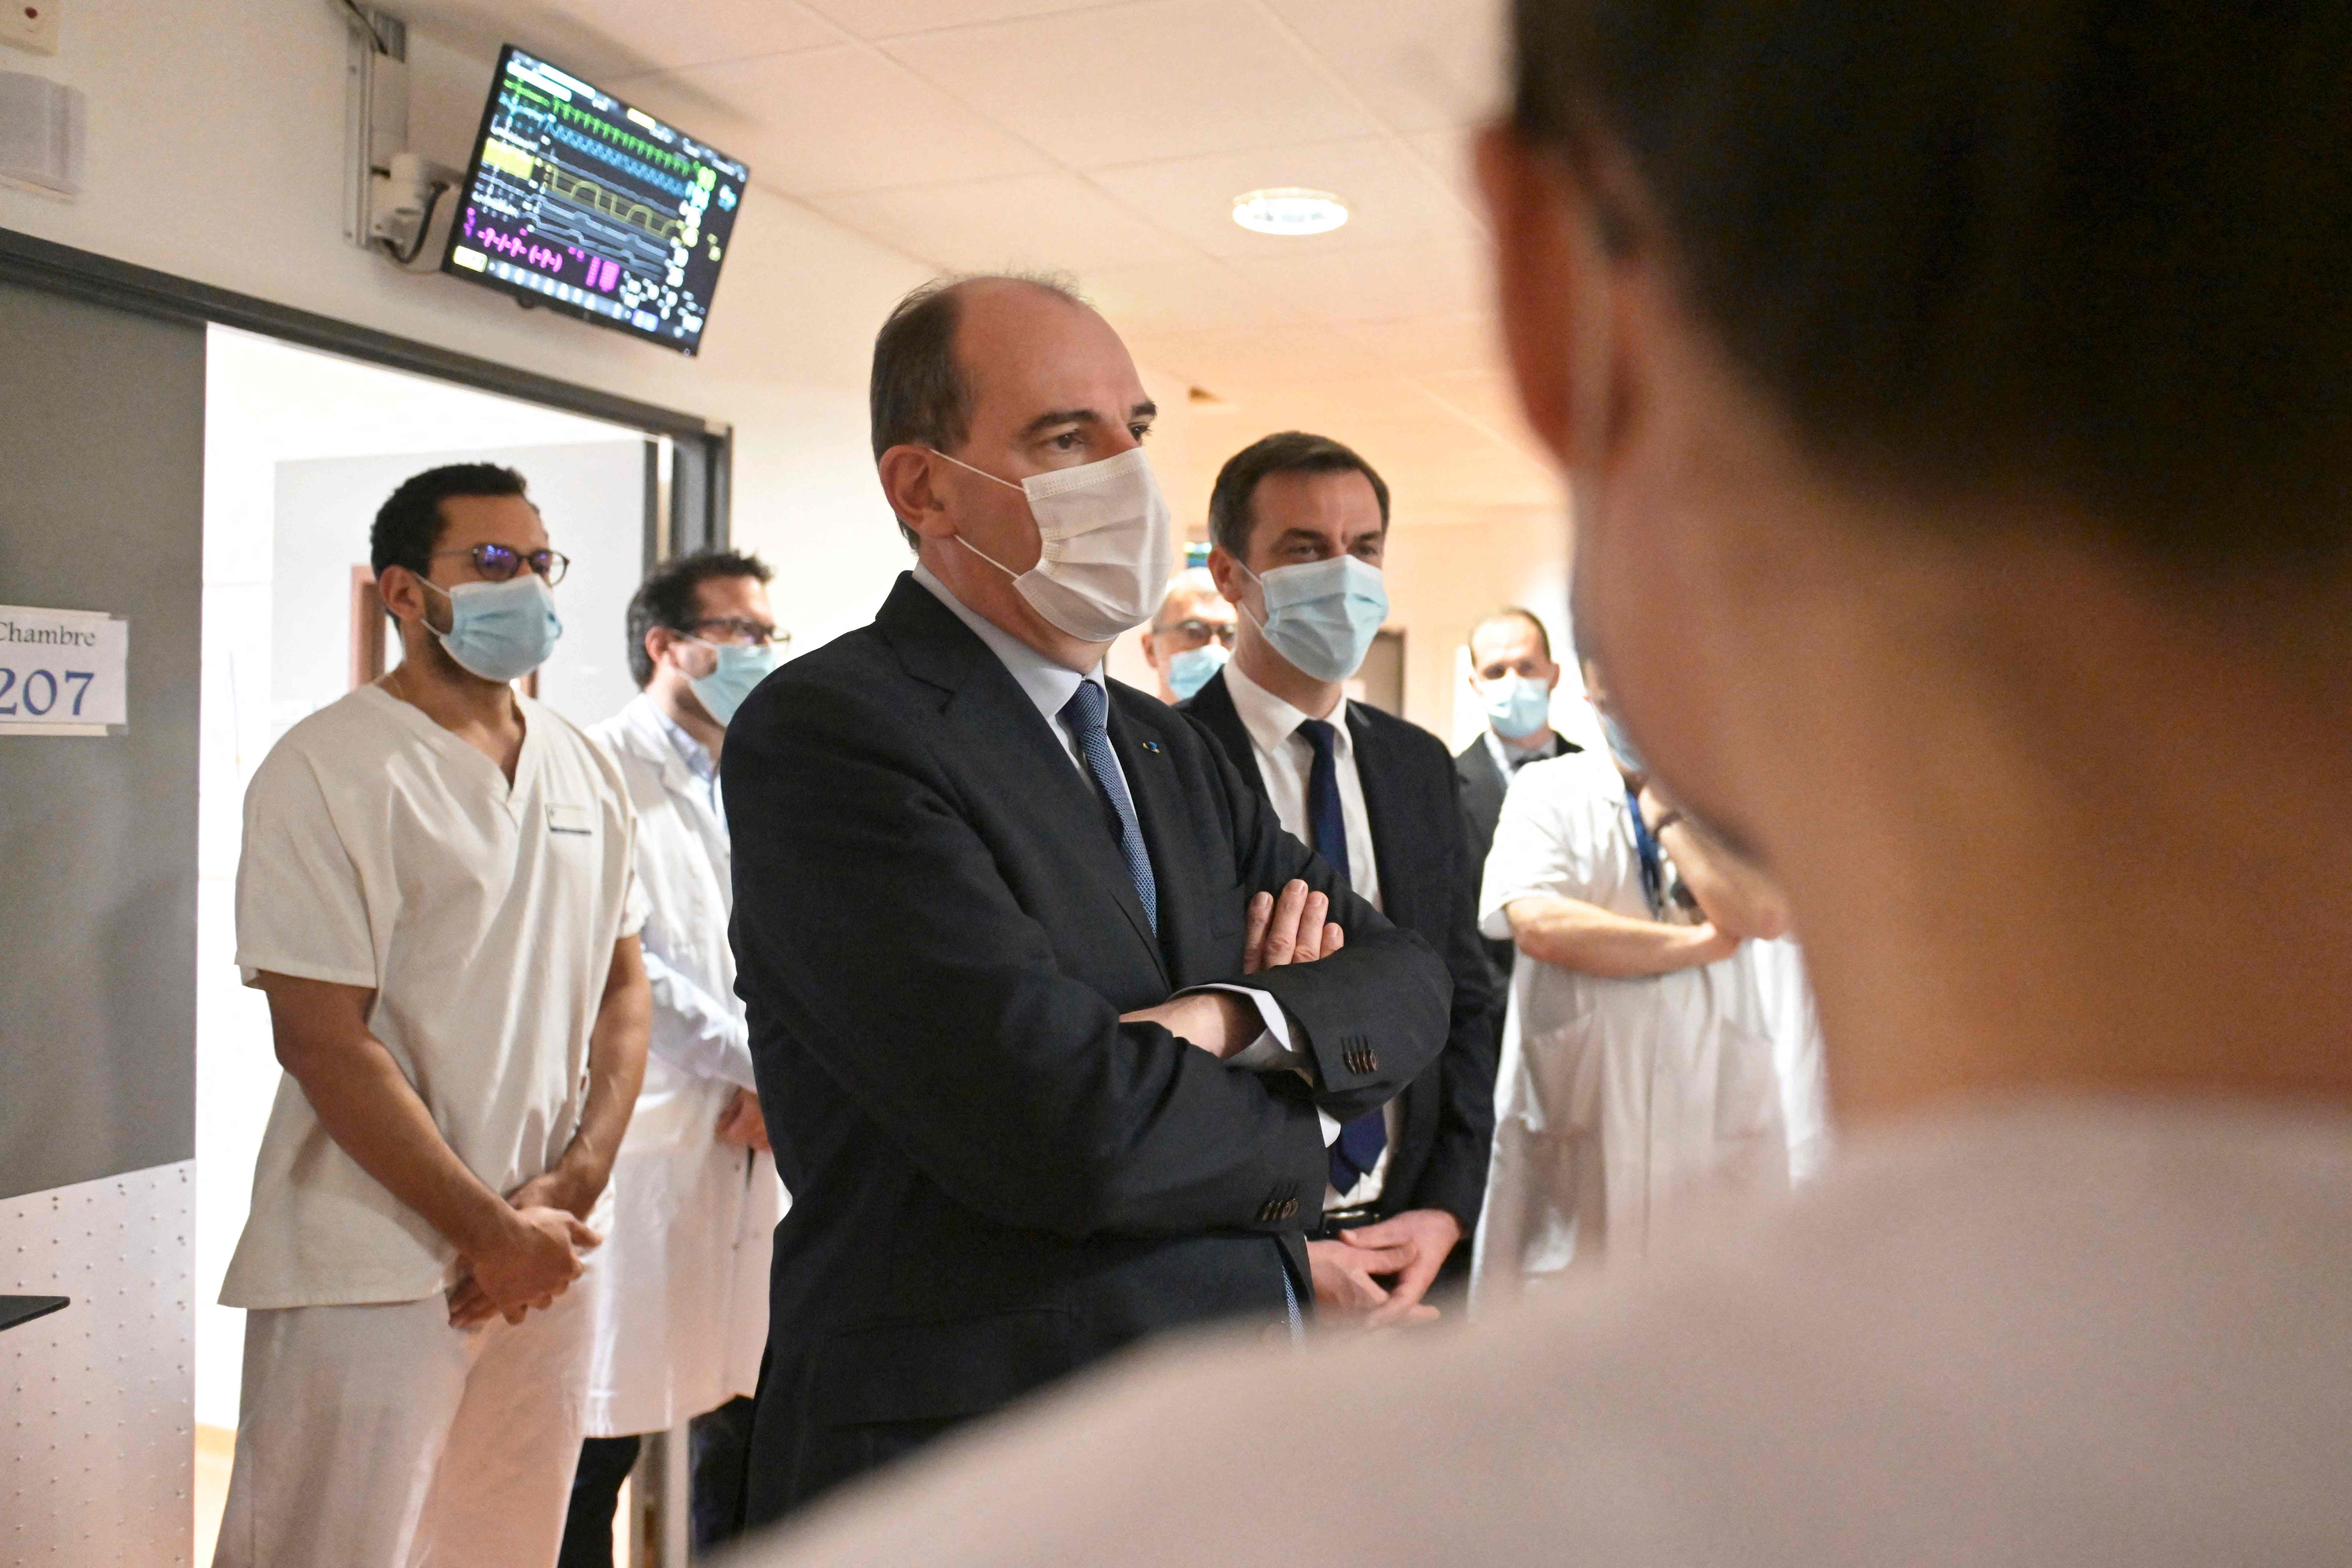 French prime minister Jean Castex (centre) and French health minister Olivier Veran (right) meet medical staff during a visit to Tours' hospital in central France on 2 April